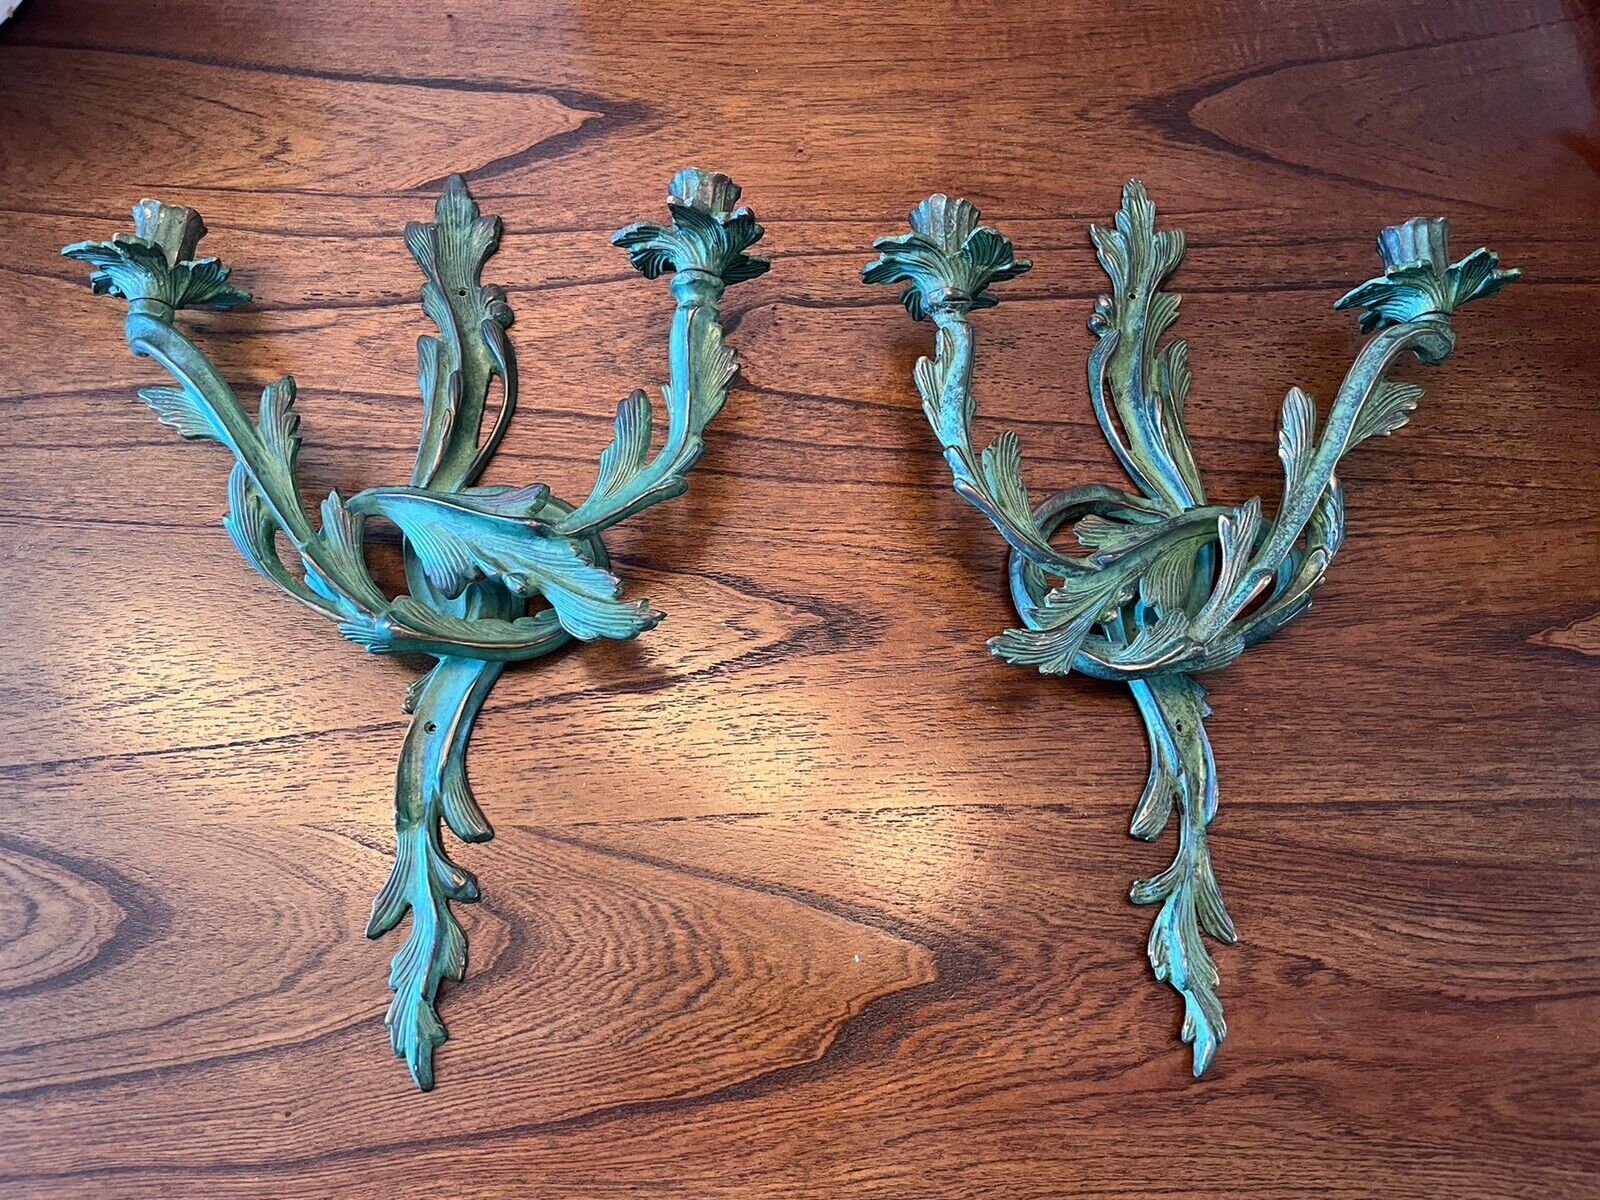 Antique Iron Candleholders Sconces, a Pair, Blue Green Iron, Wall Mounted